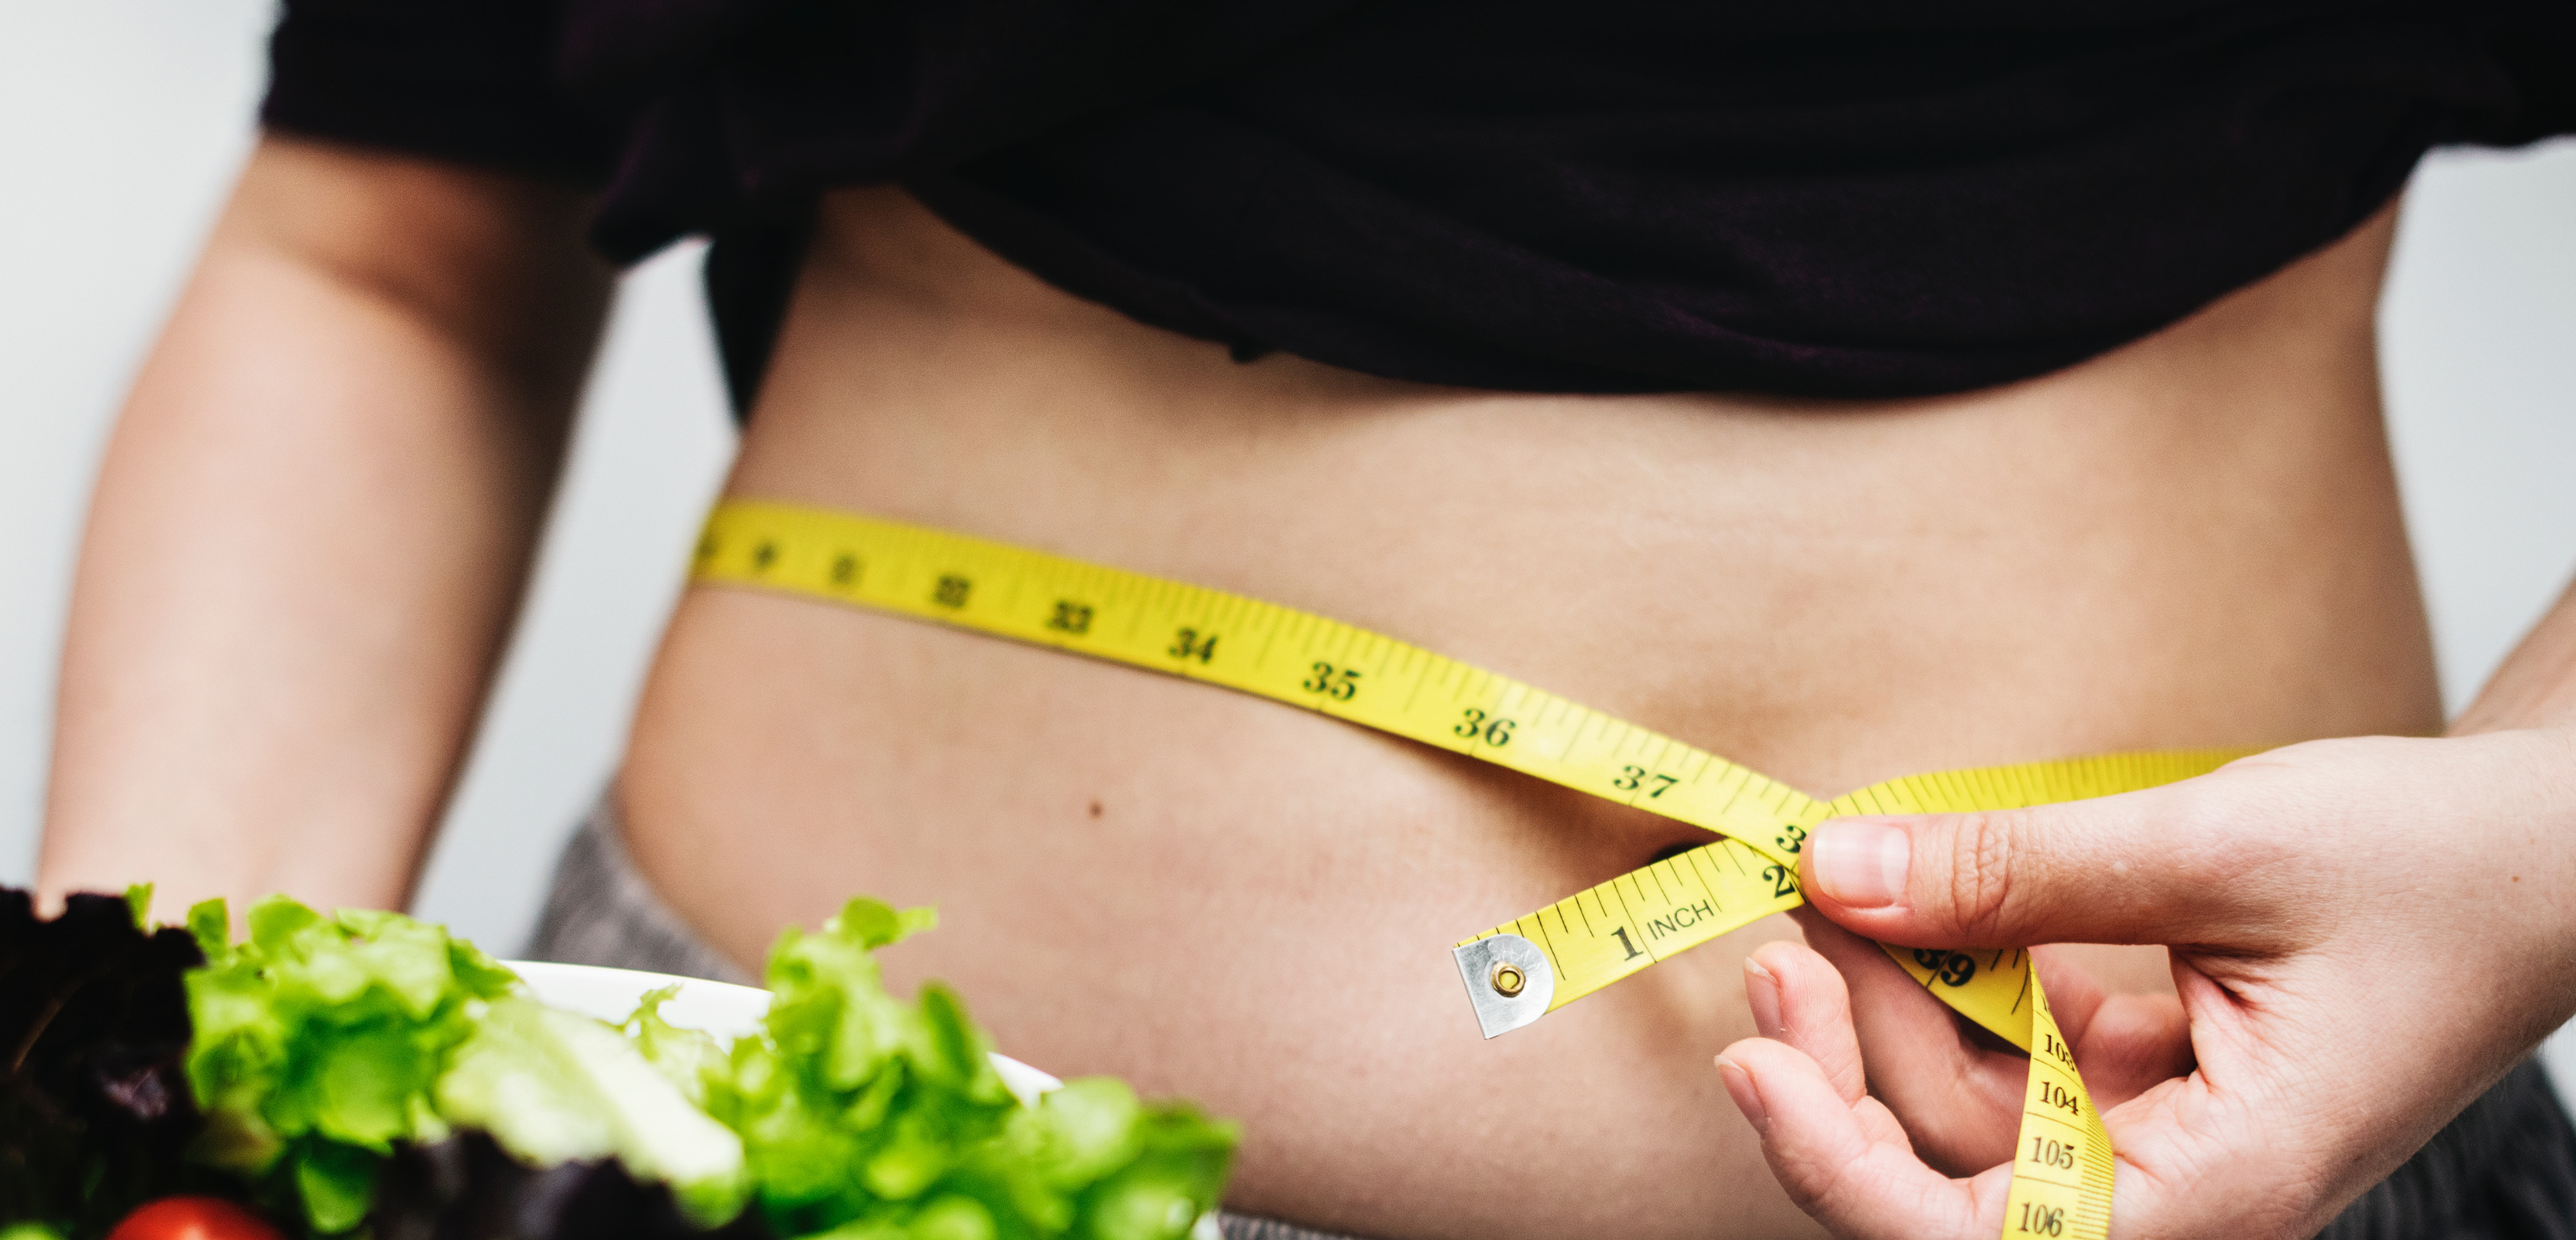 Personalised weight feedback can help tackle obesity in the UK